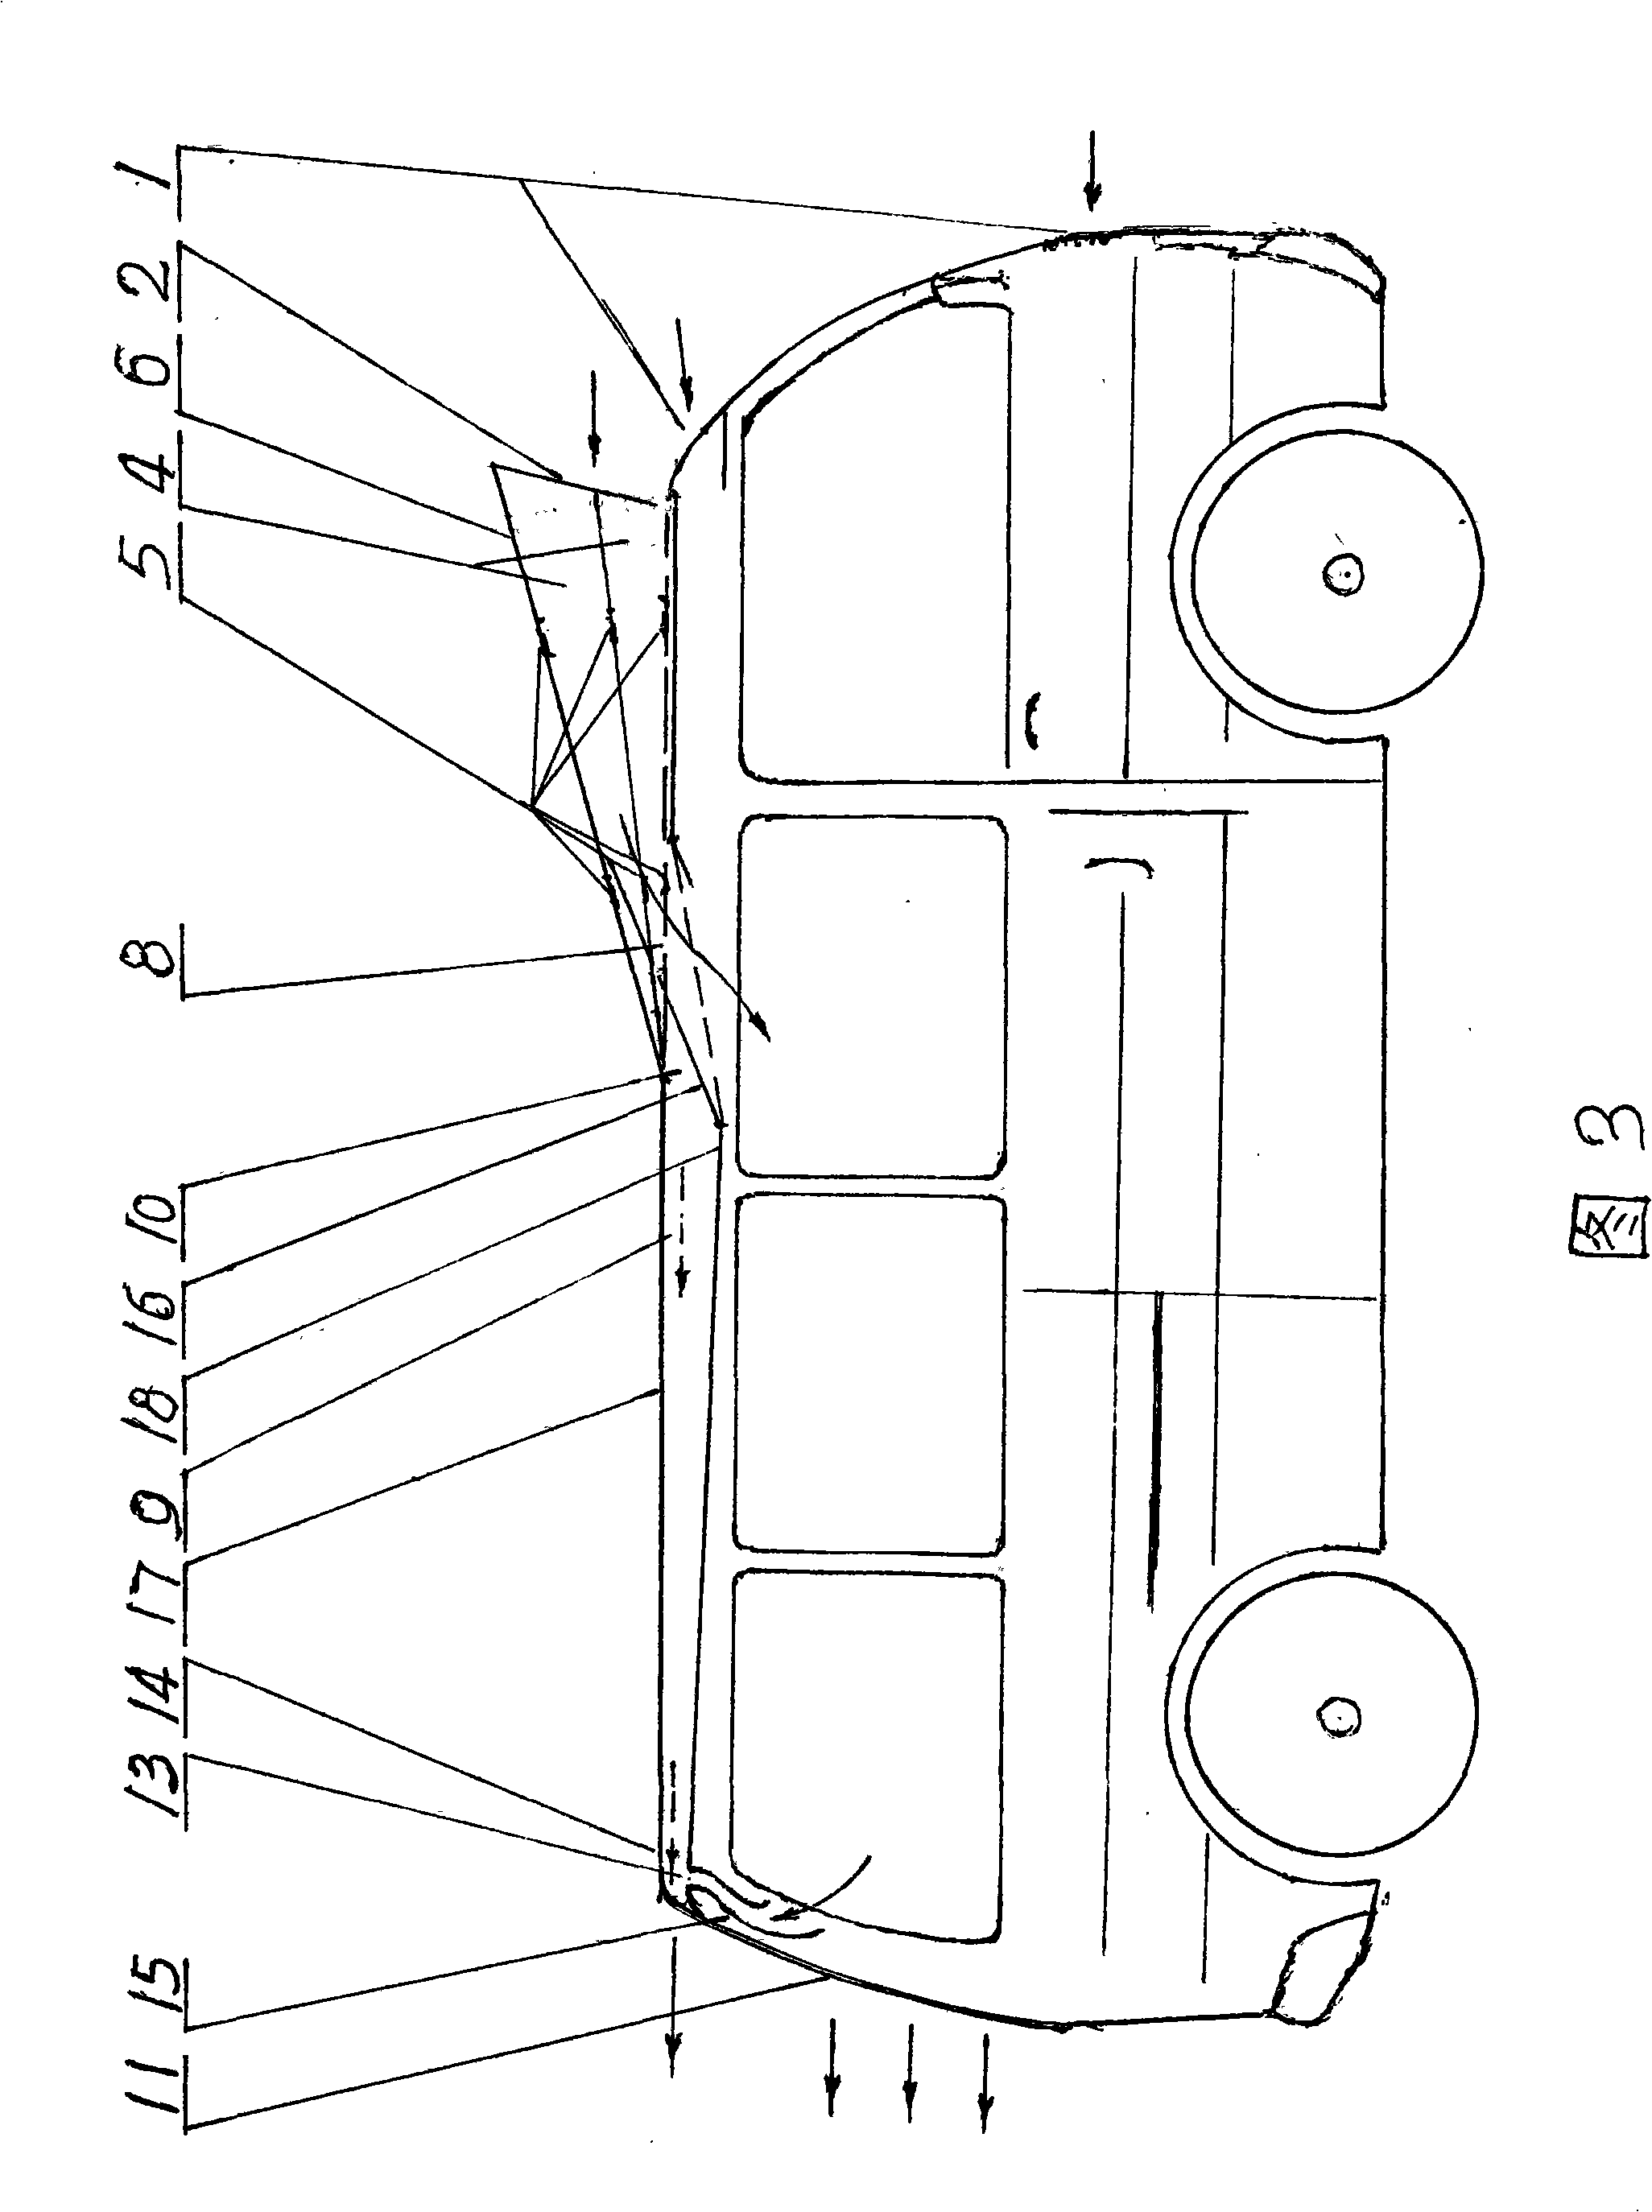 Device for automatically forcing to discharge and ventilate air for passenger car and driver's compartment